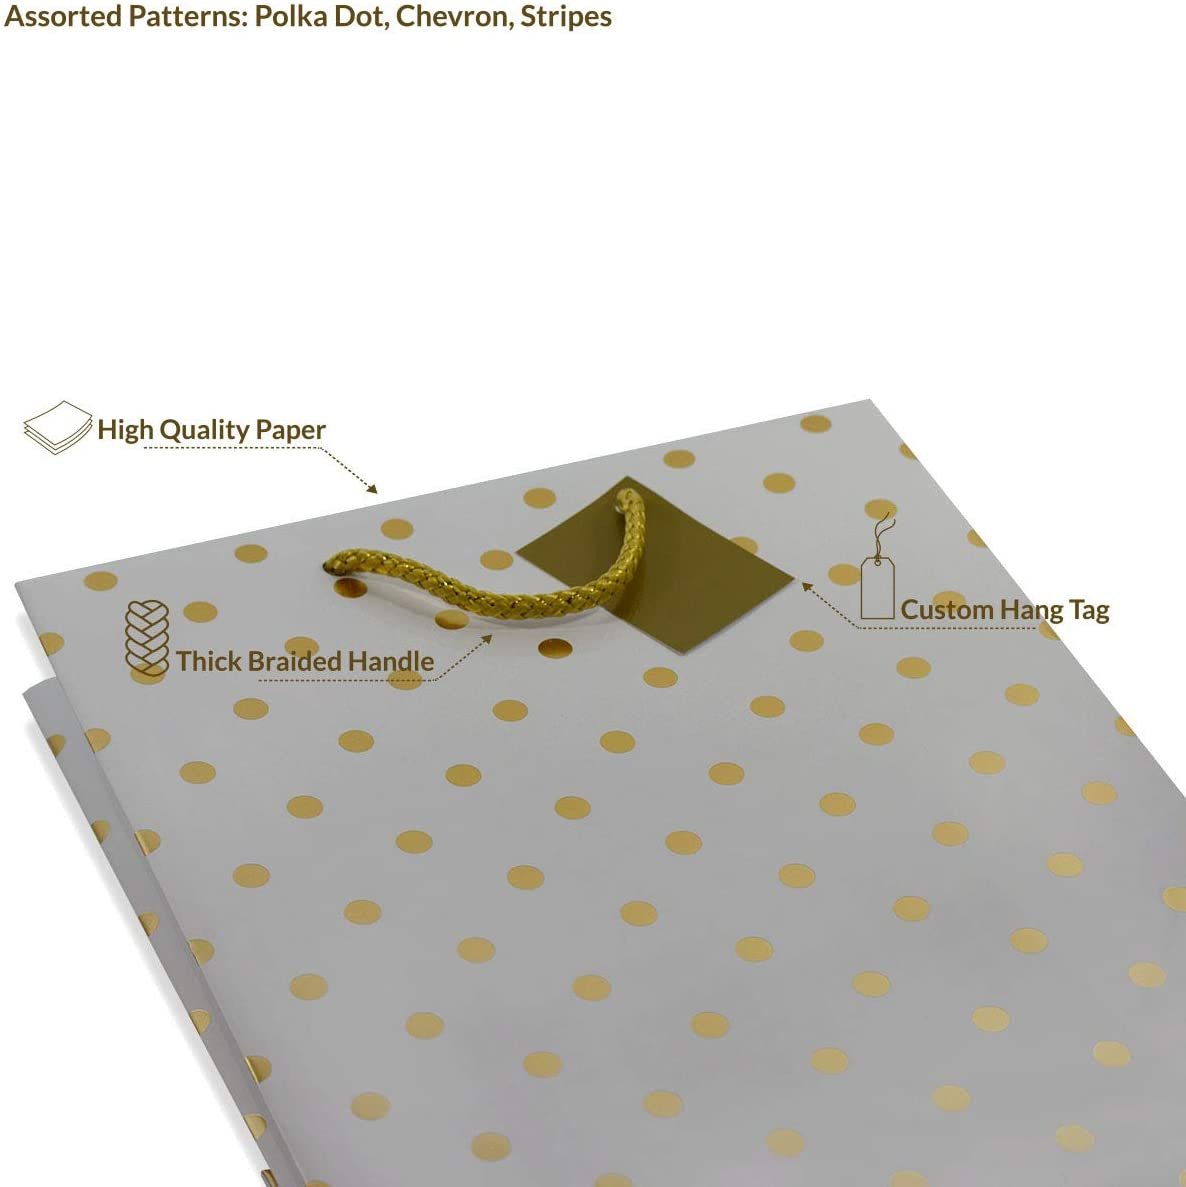 Gold Metalic Chevron Stripe Gift Bags w/Handles, Assorted Designs, 4x4.5x2.75 Inch (12 Pack)